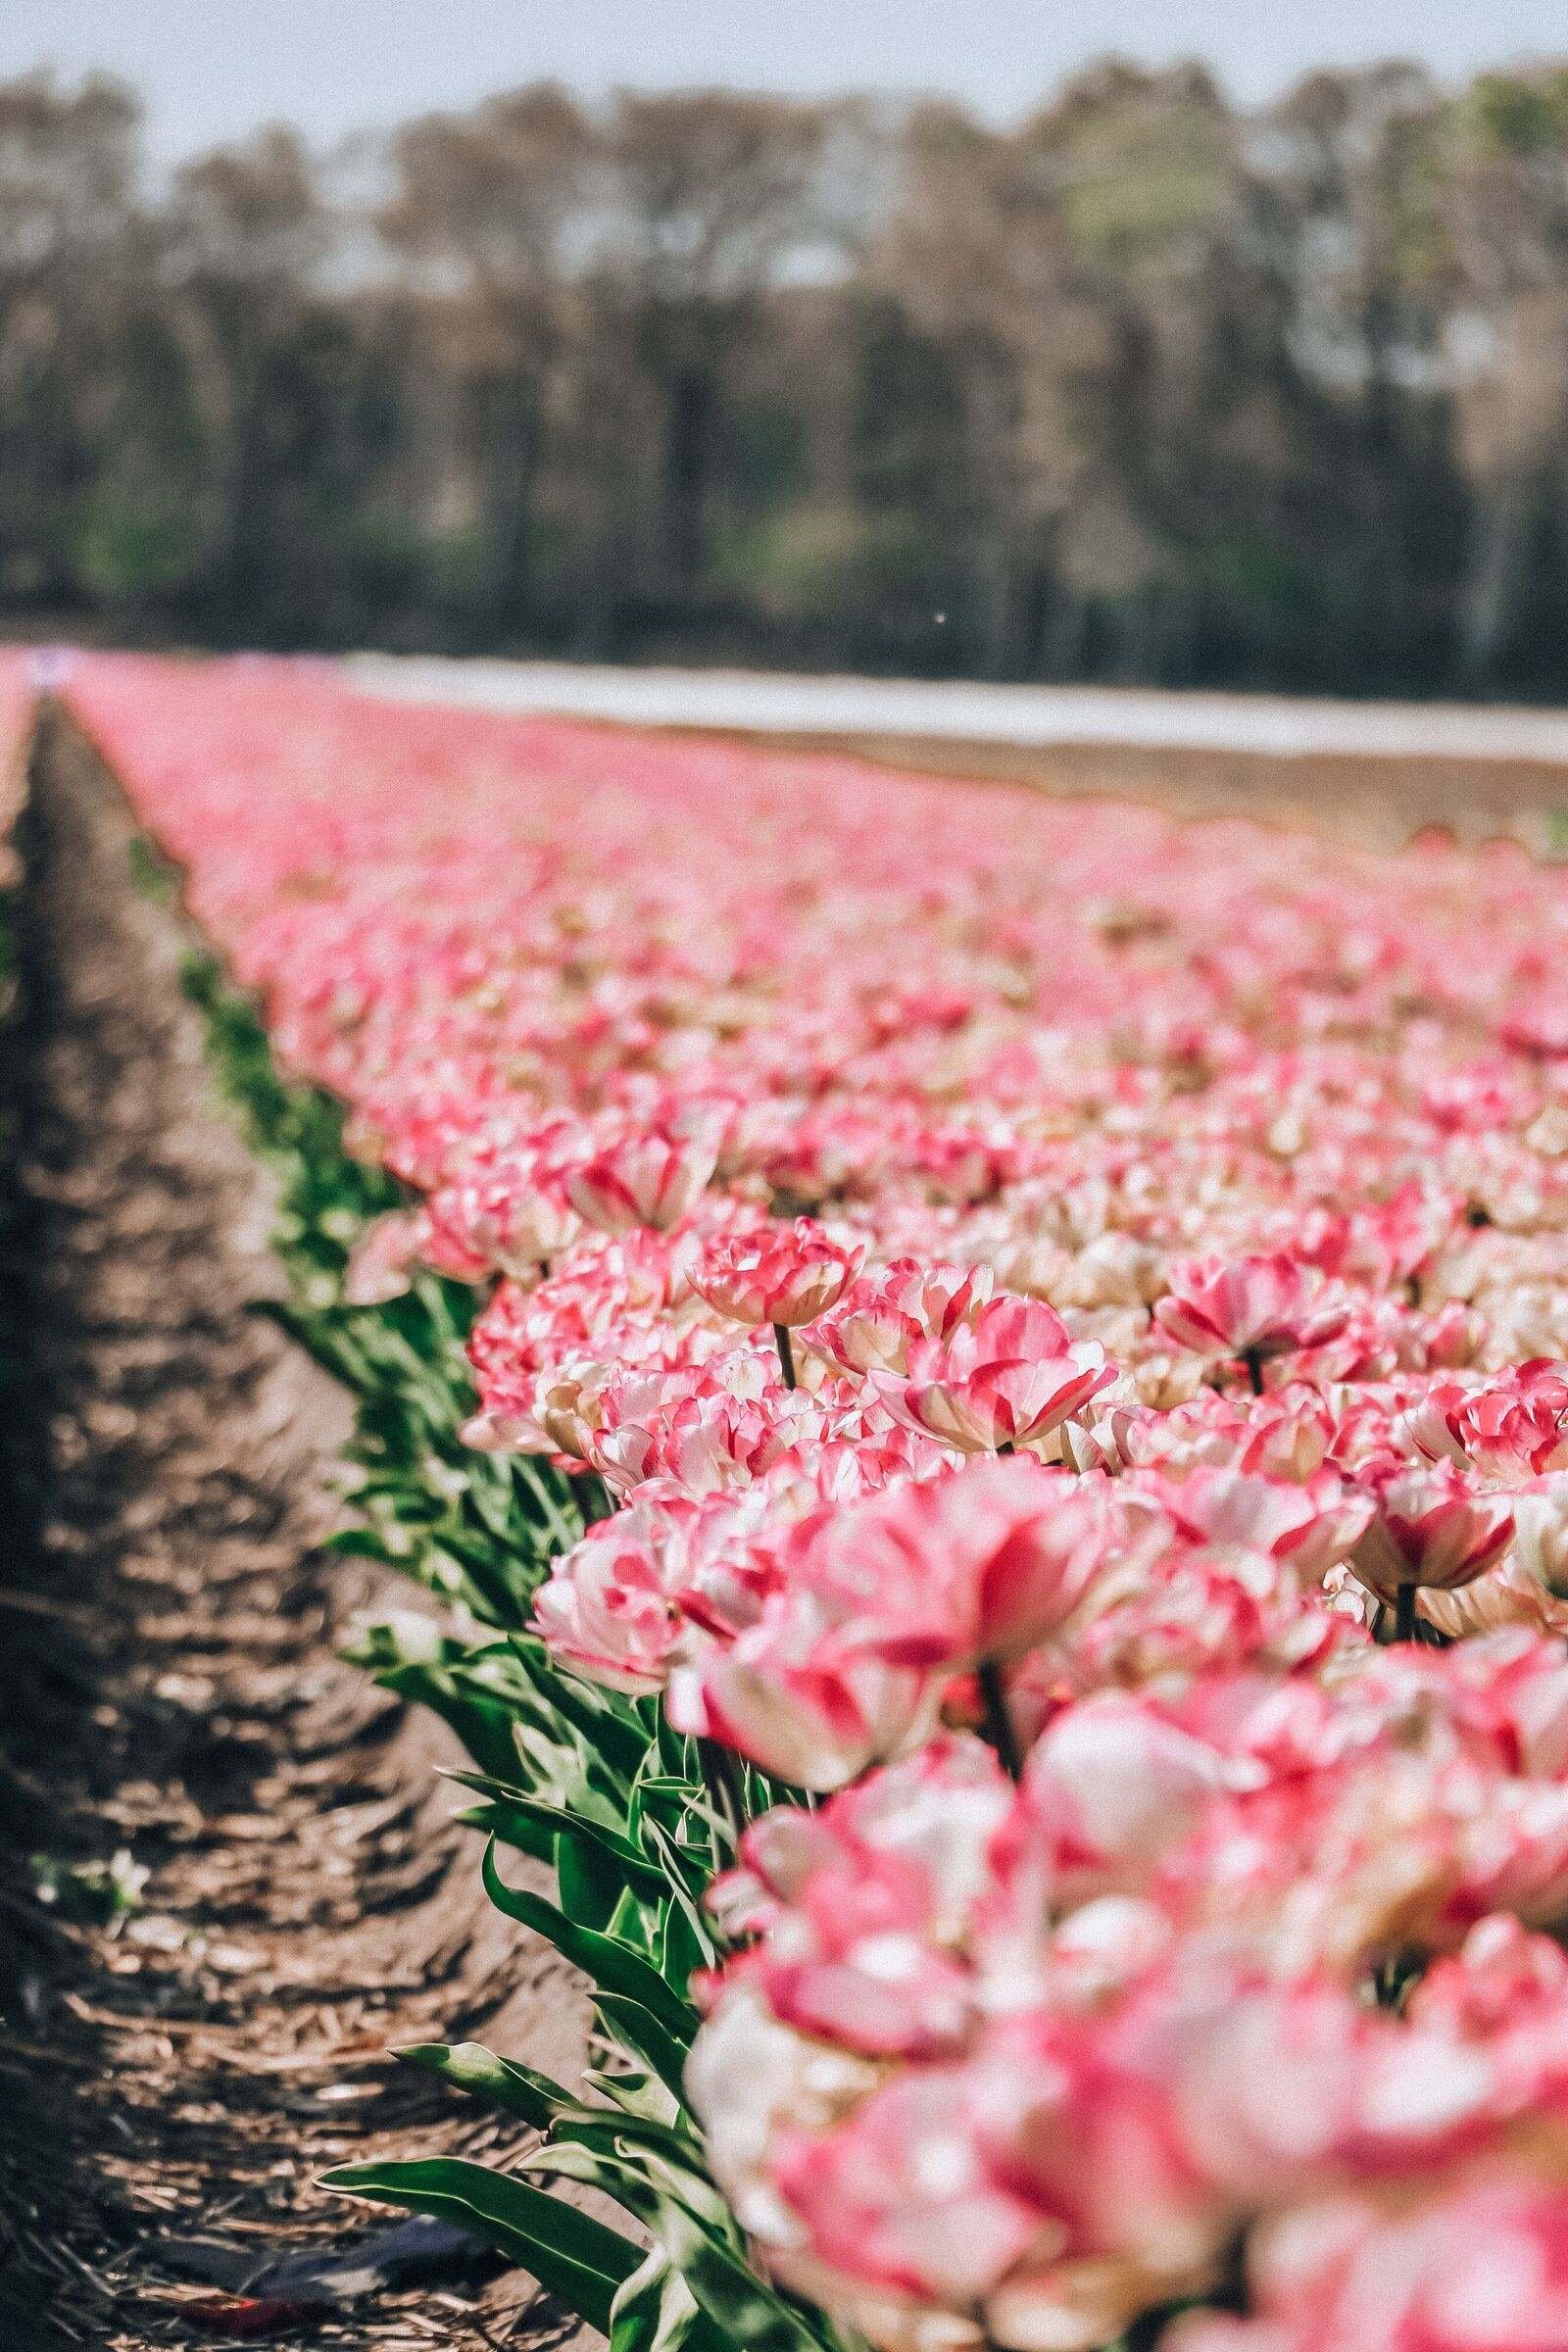 A Guide to seeing the tulips in Lisse on a budget